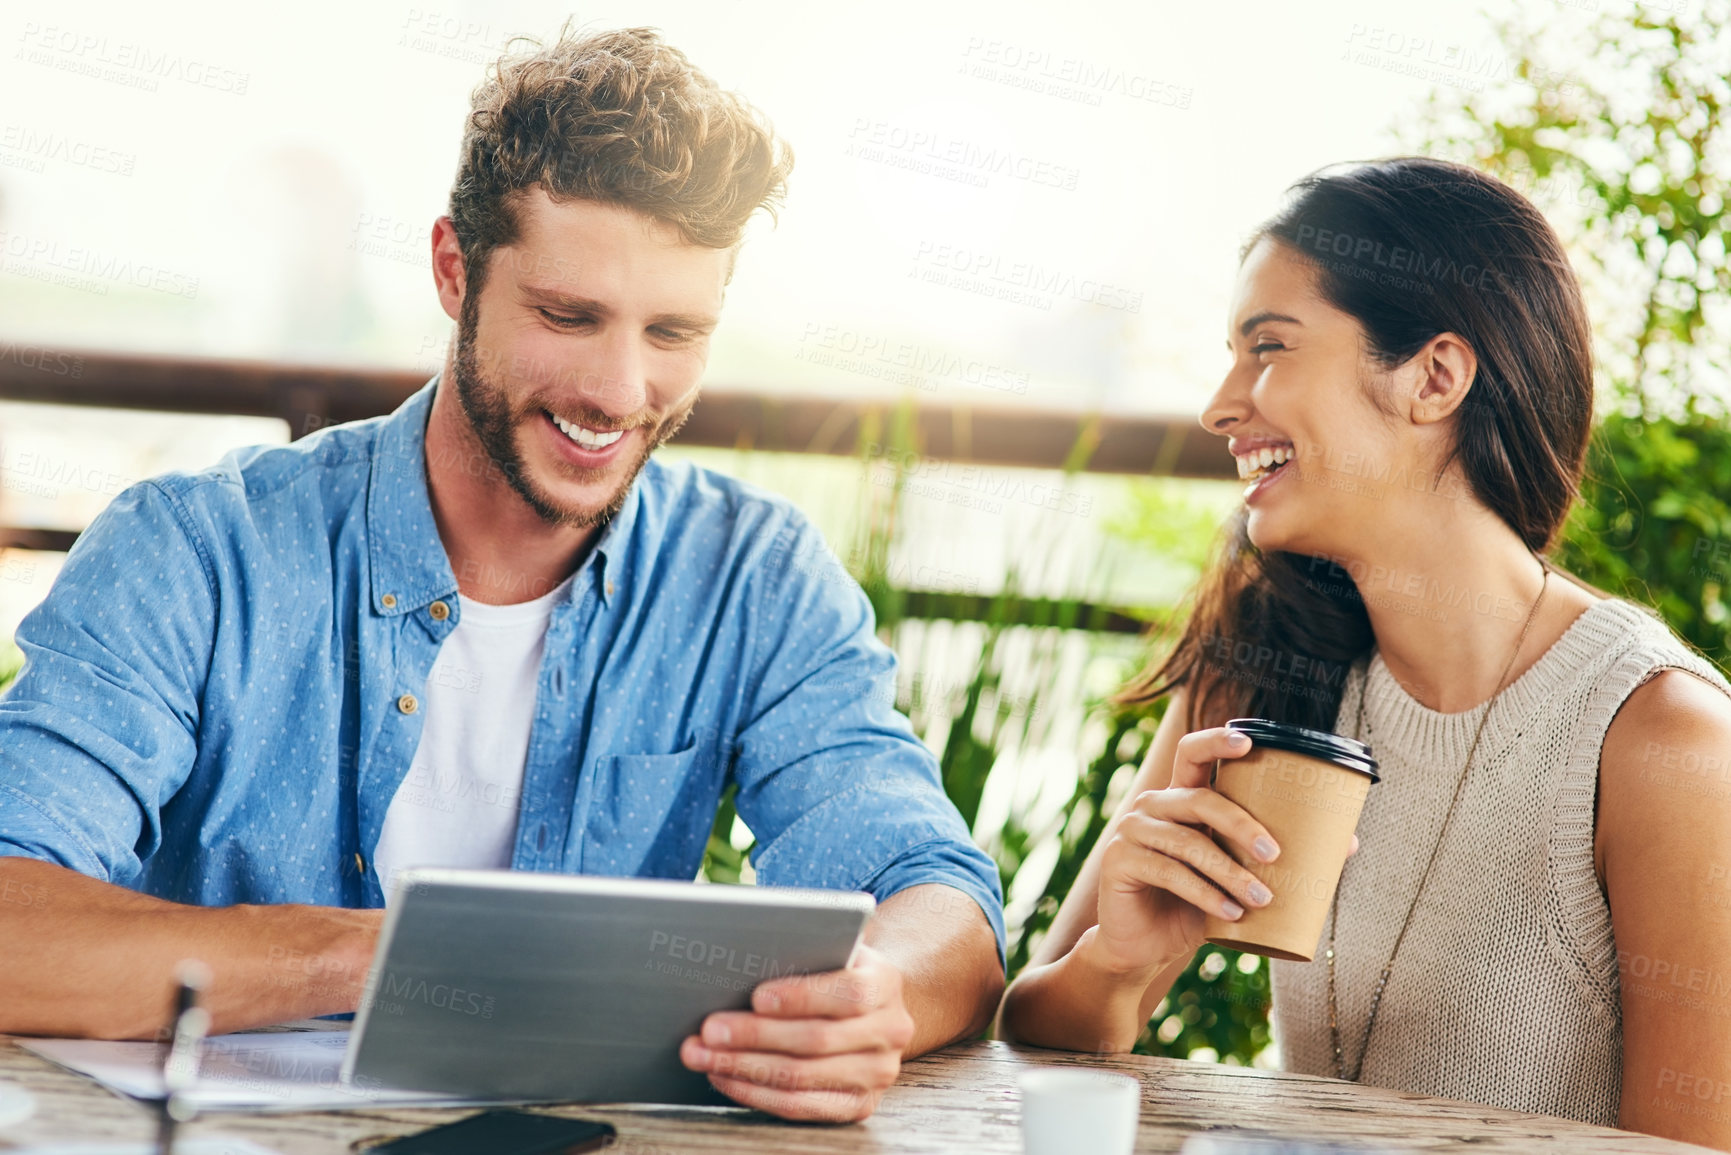 Buy stock photo Shot of two businesspeople using a digital tablet together outdoors